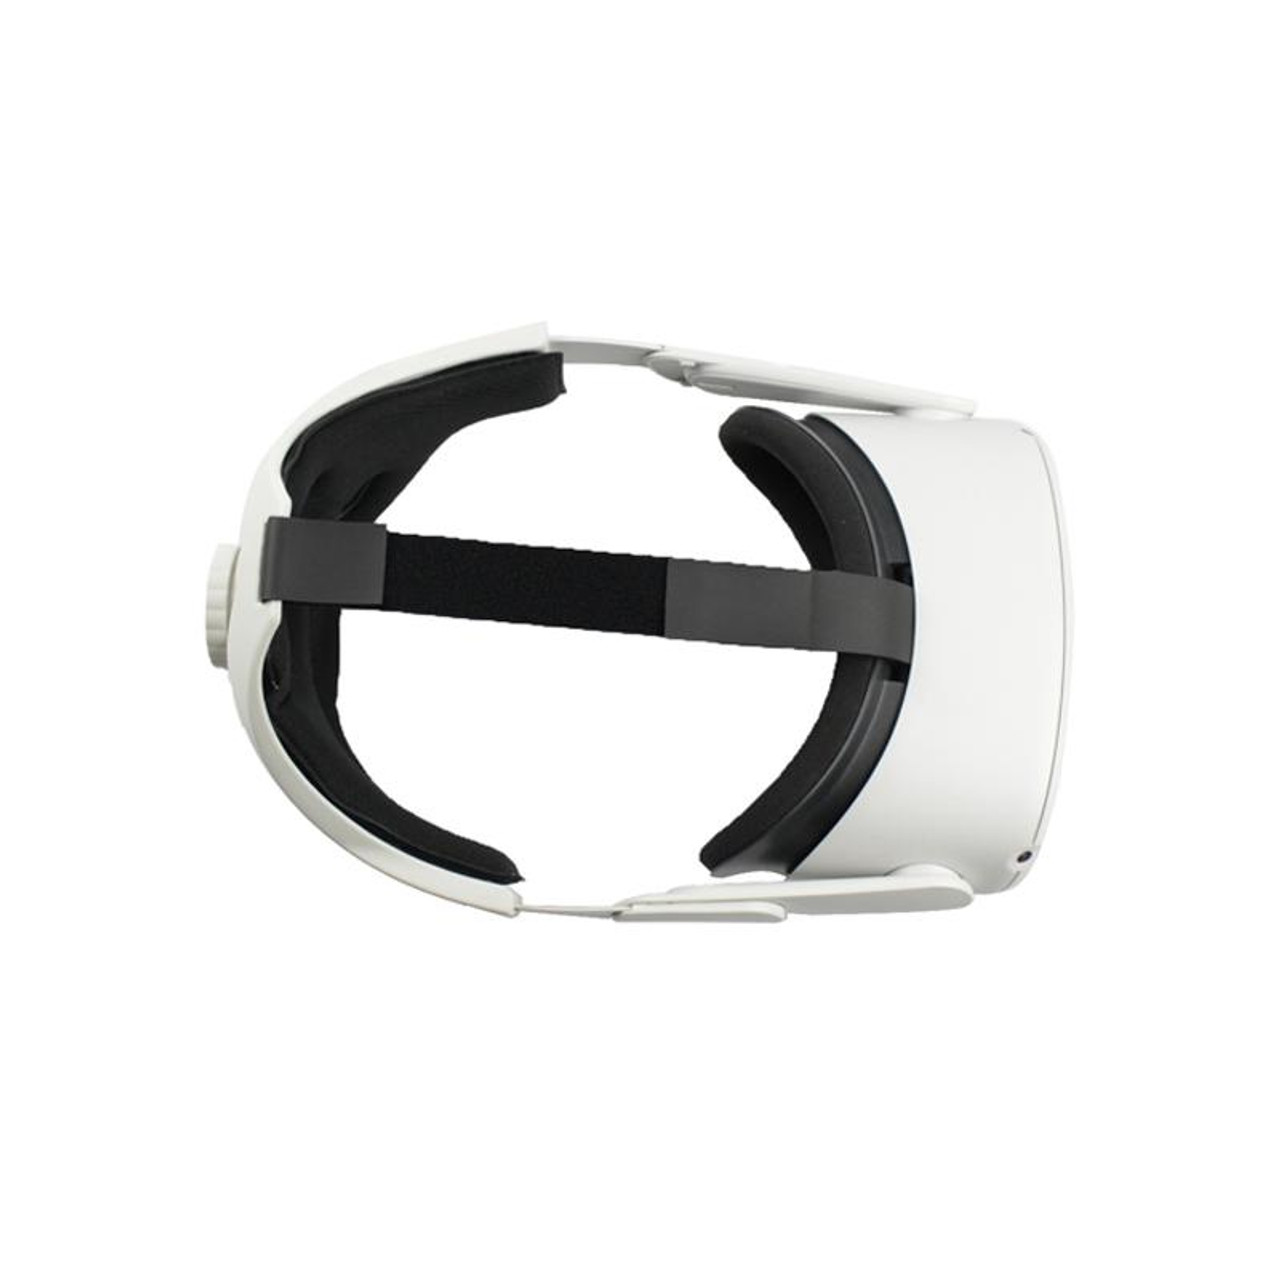 VR Comfortable Replacement Headset VR Accessories Weight Loss Headband, for Oculus Quest 2